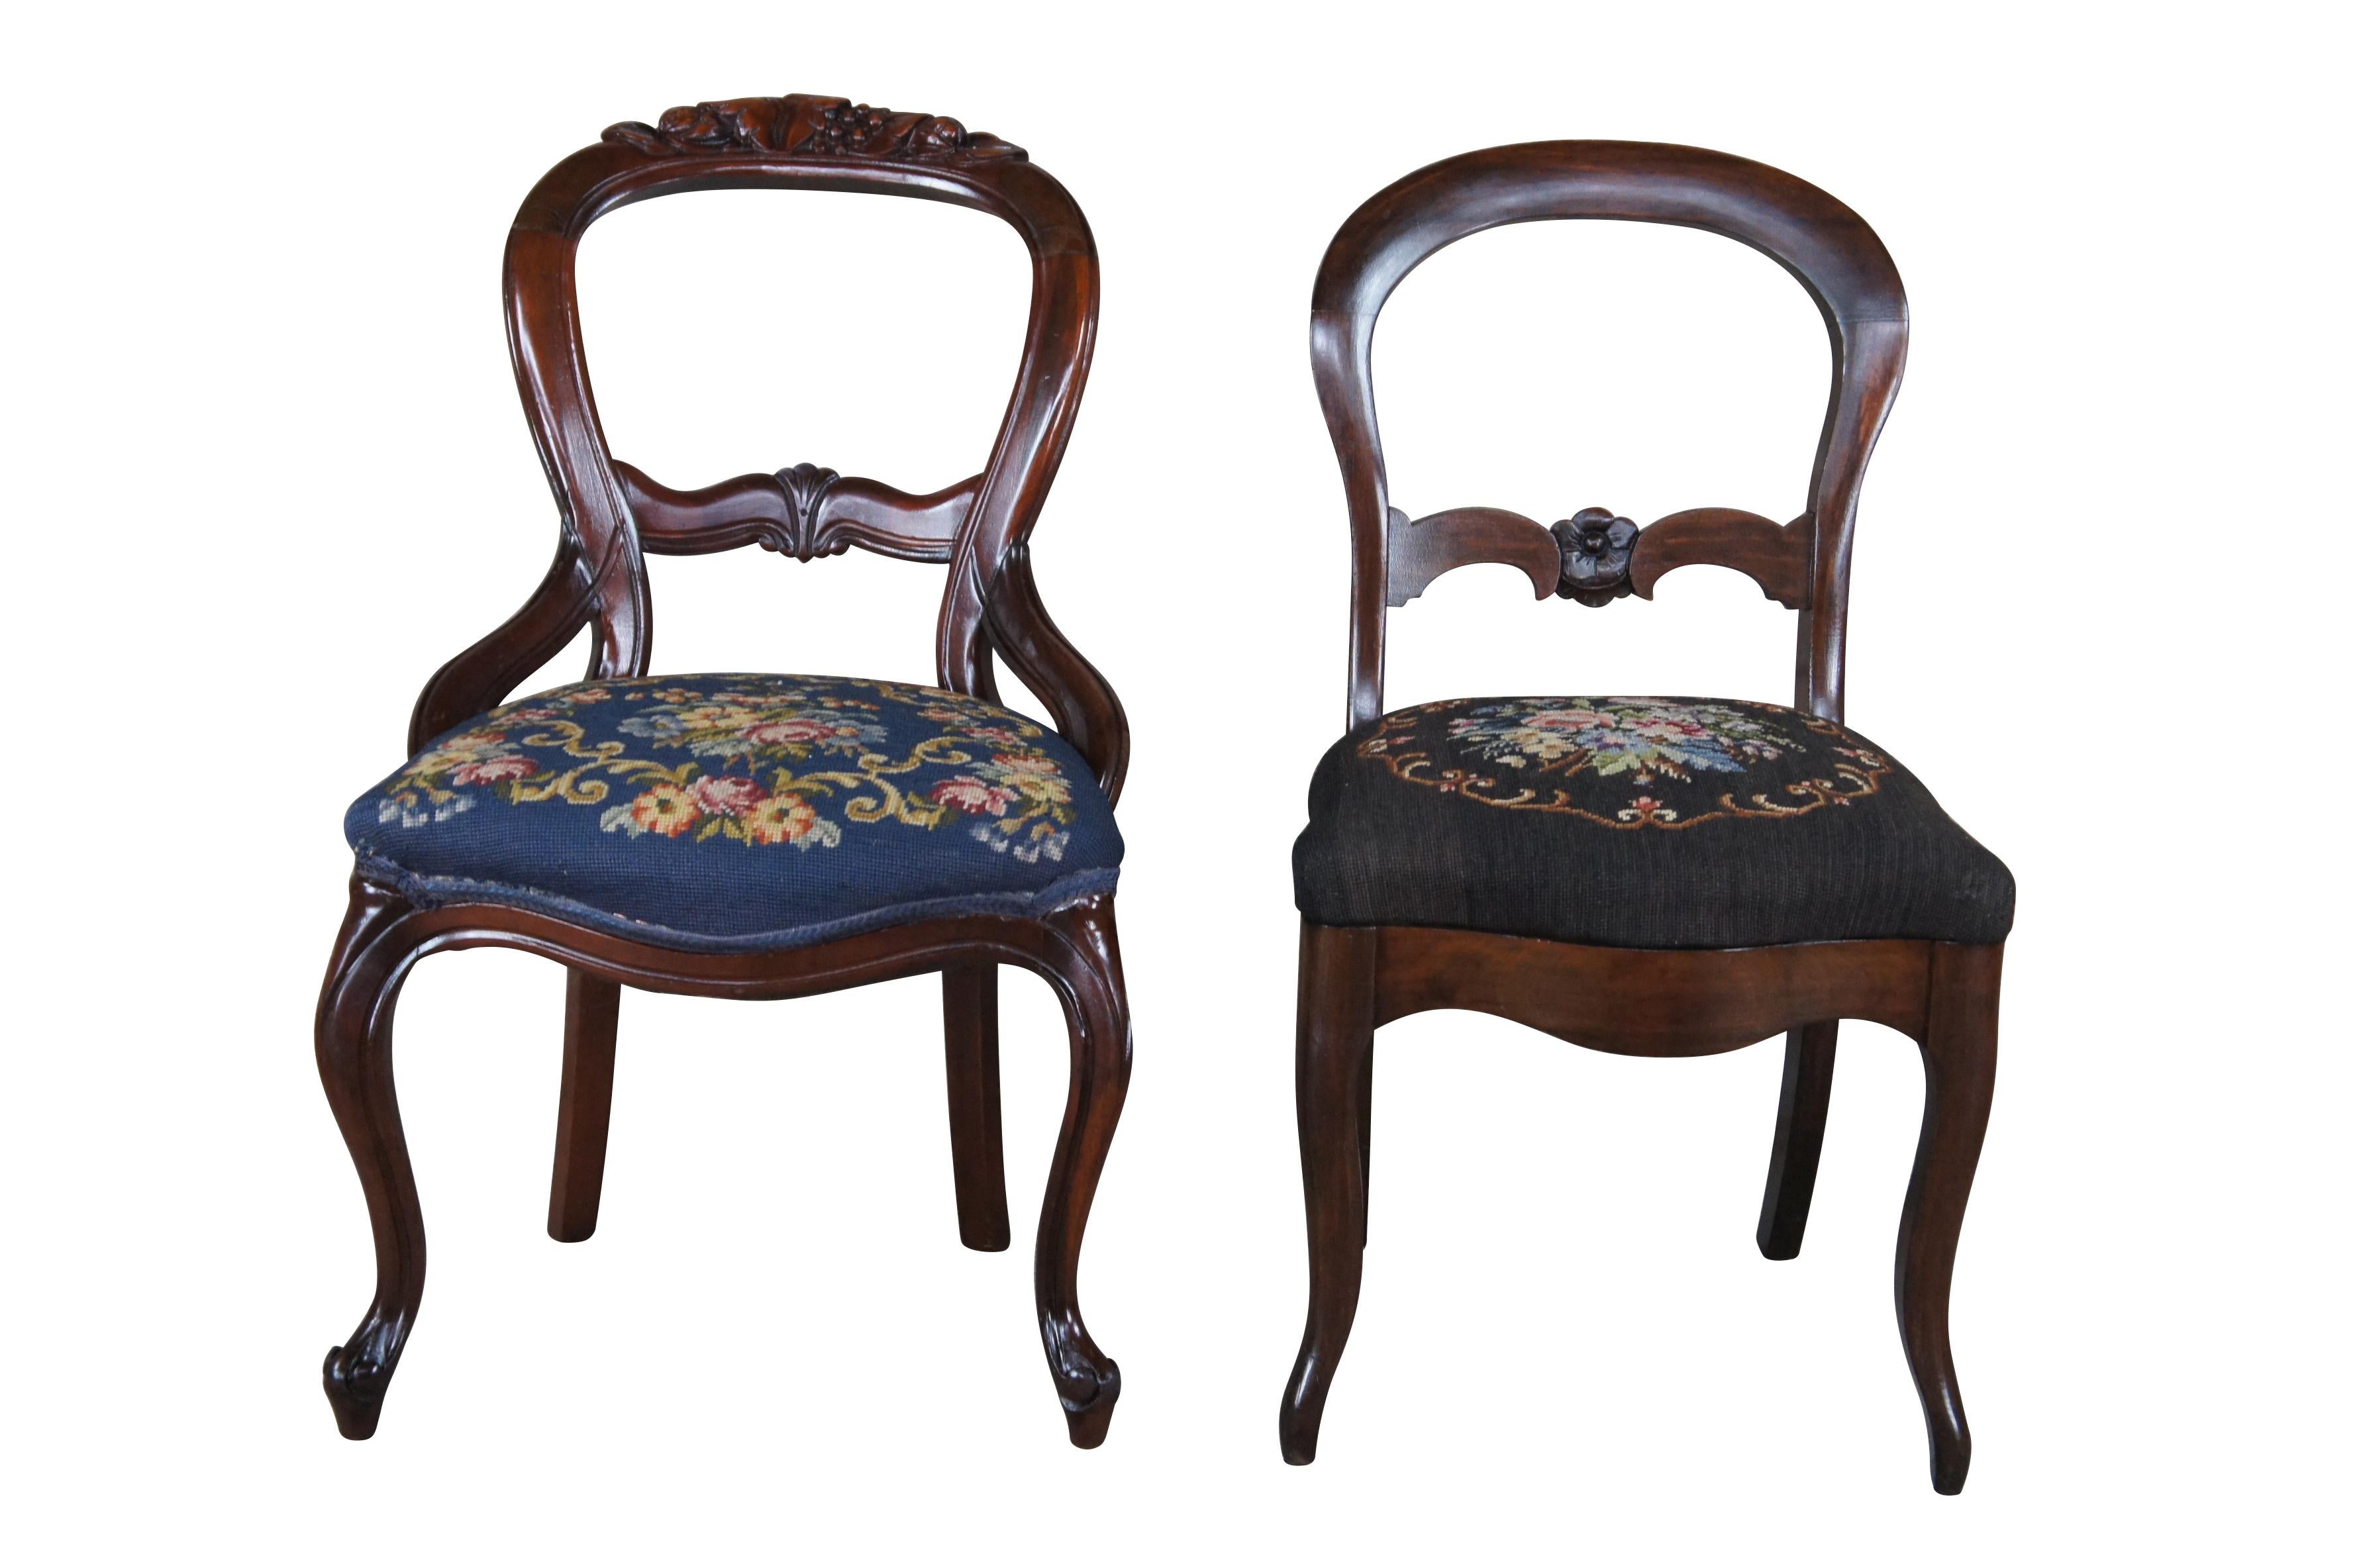 Lot of 4 Victorian Dining or side chairs from the last half of the 19th century.  Each is made from mahogany with a carved balloon back and floral needelpoint.  Each of the chairs has a serpentine front apron and contoured or cabriole legs.  